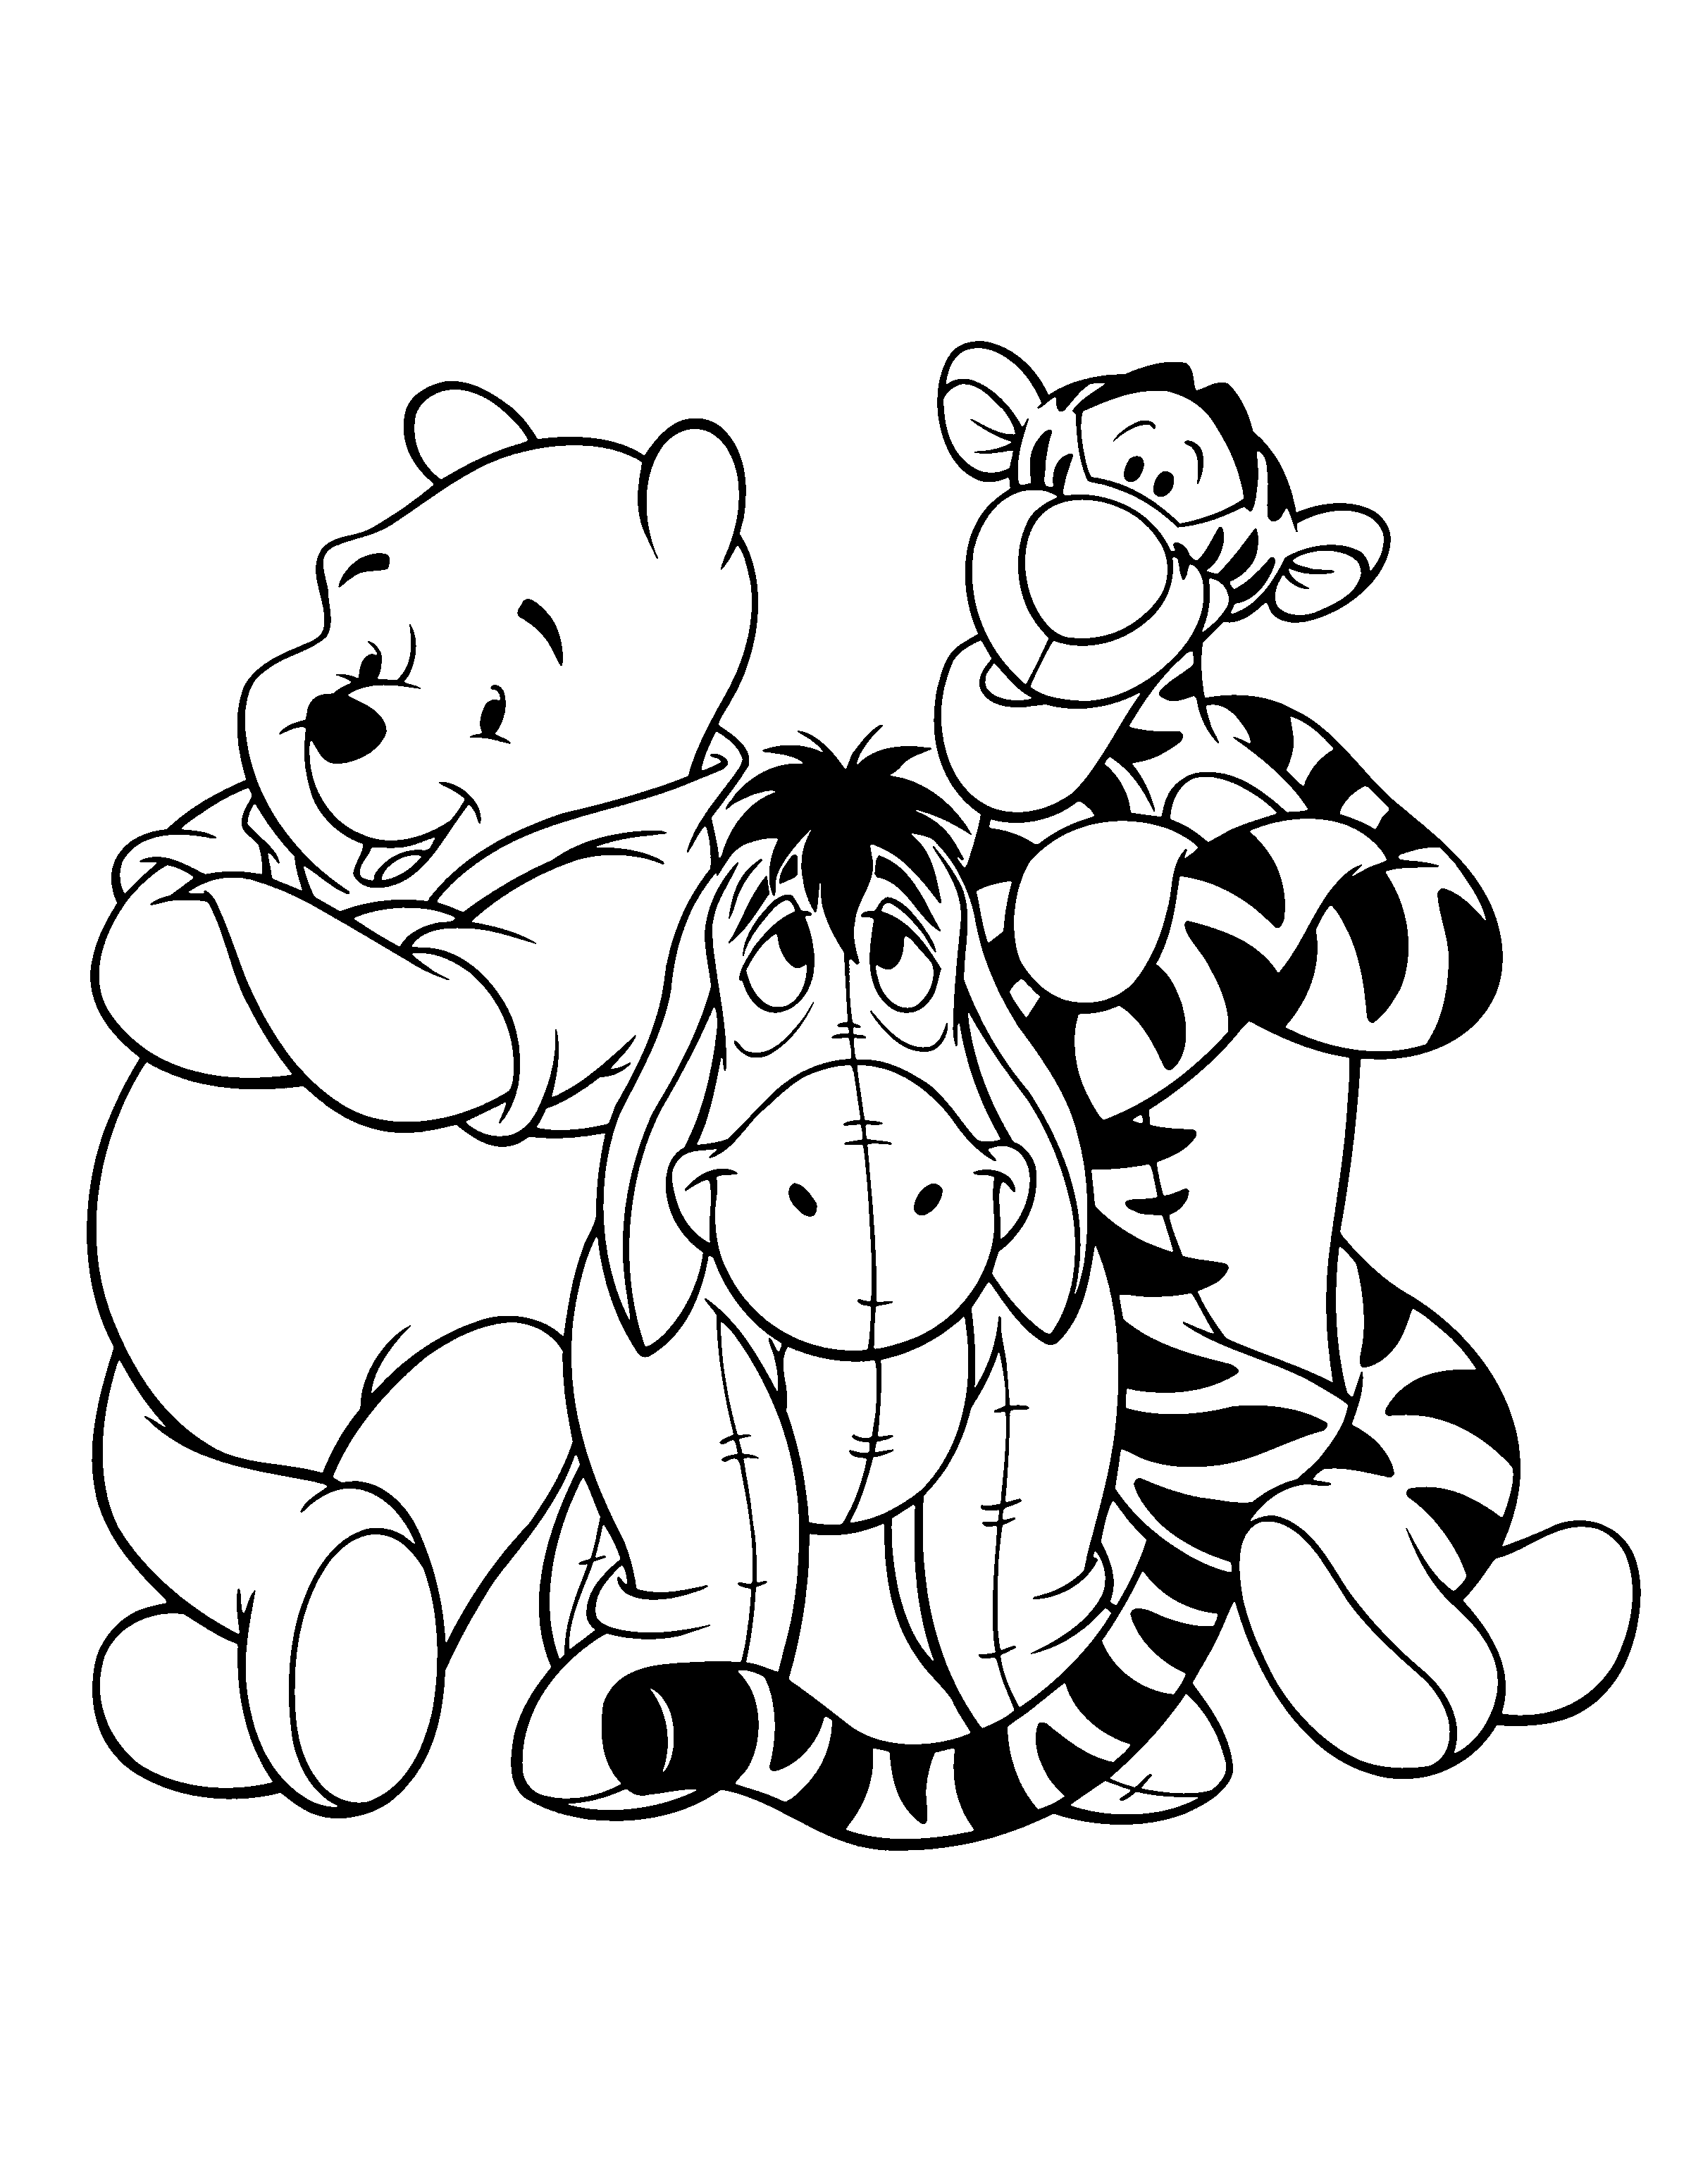 coloring-page-winnie-the-pooh-coloring-pages-60